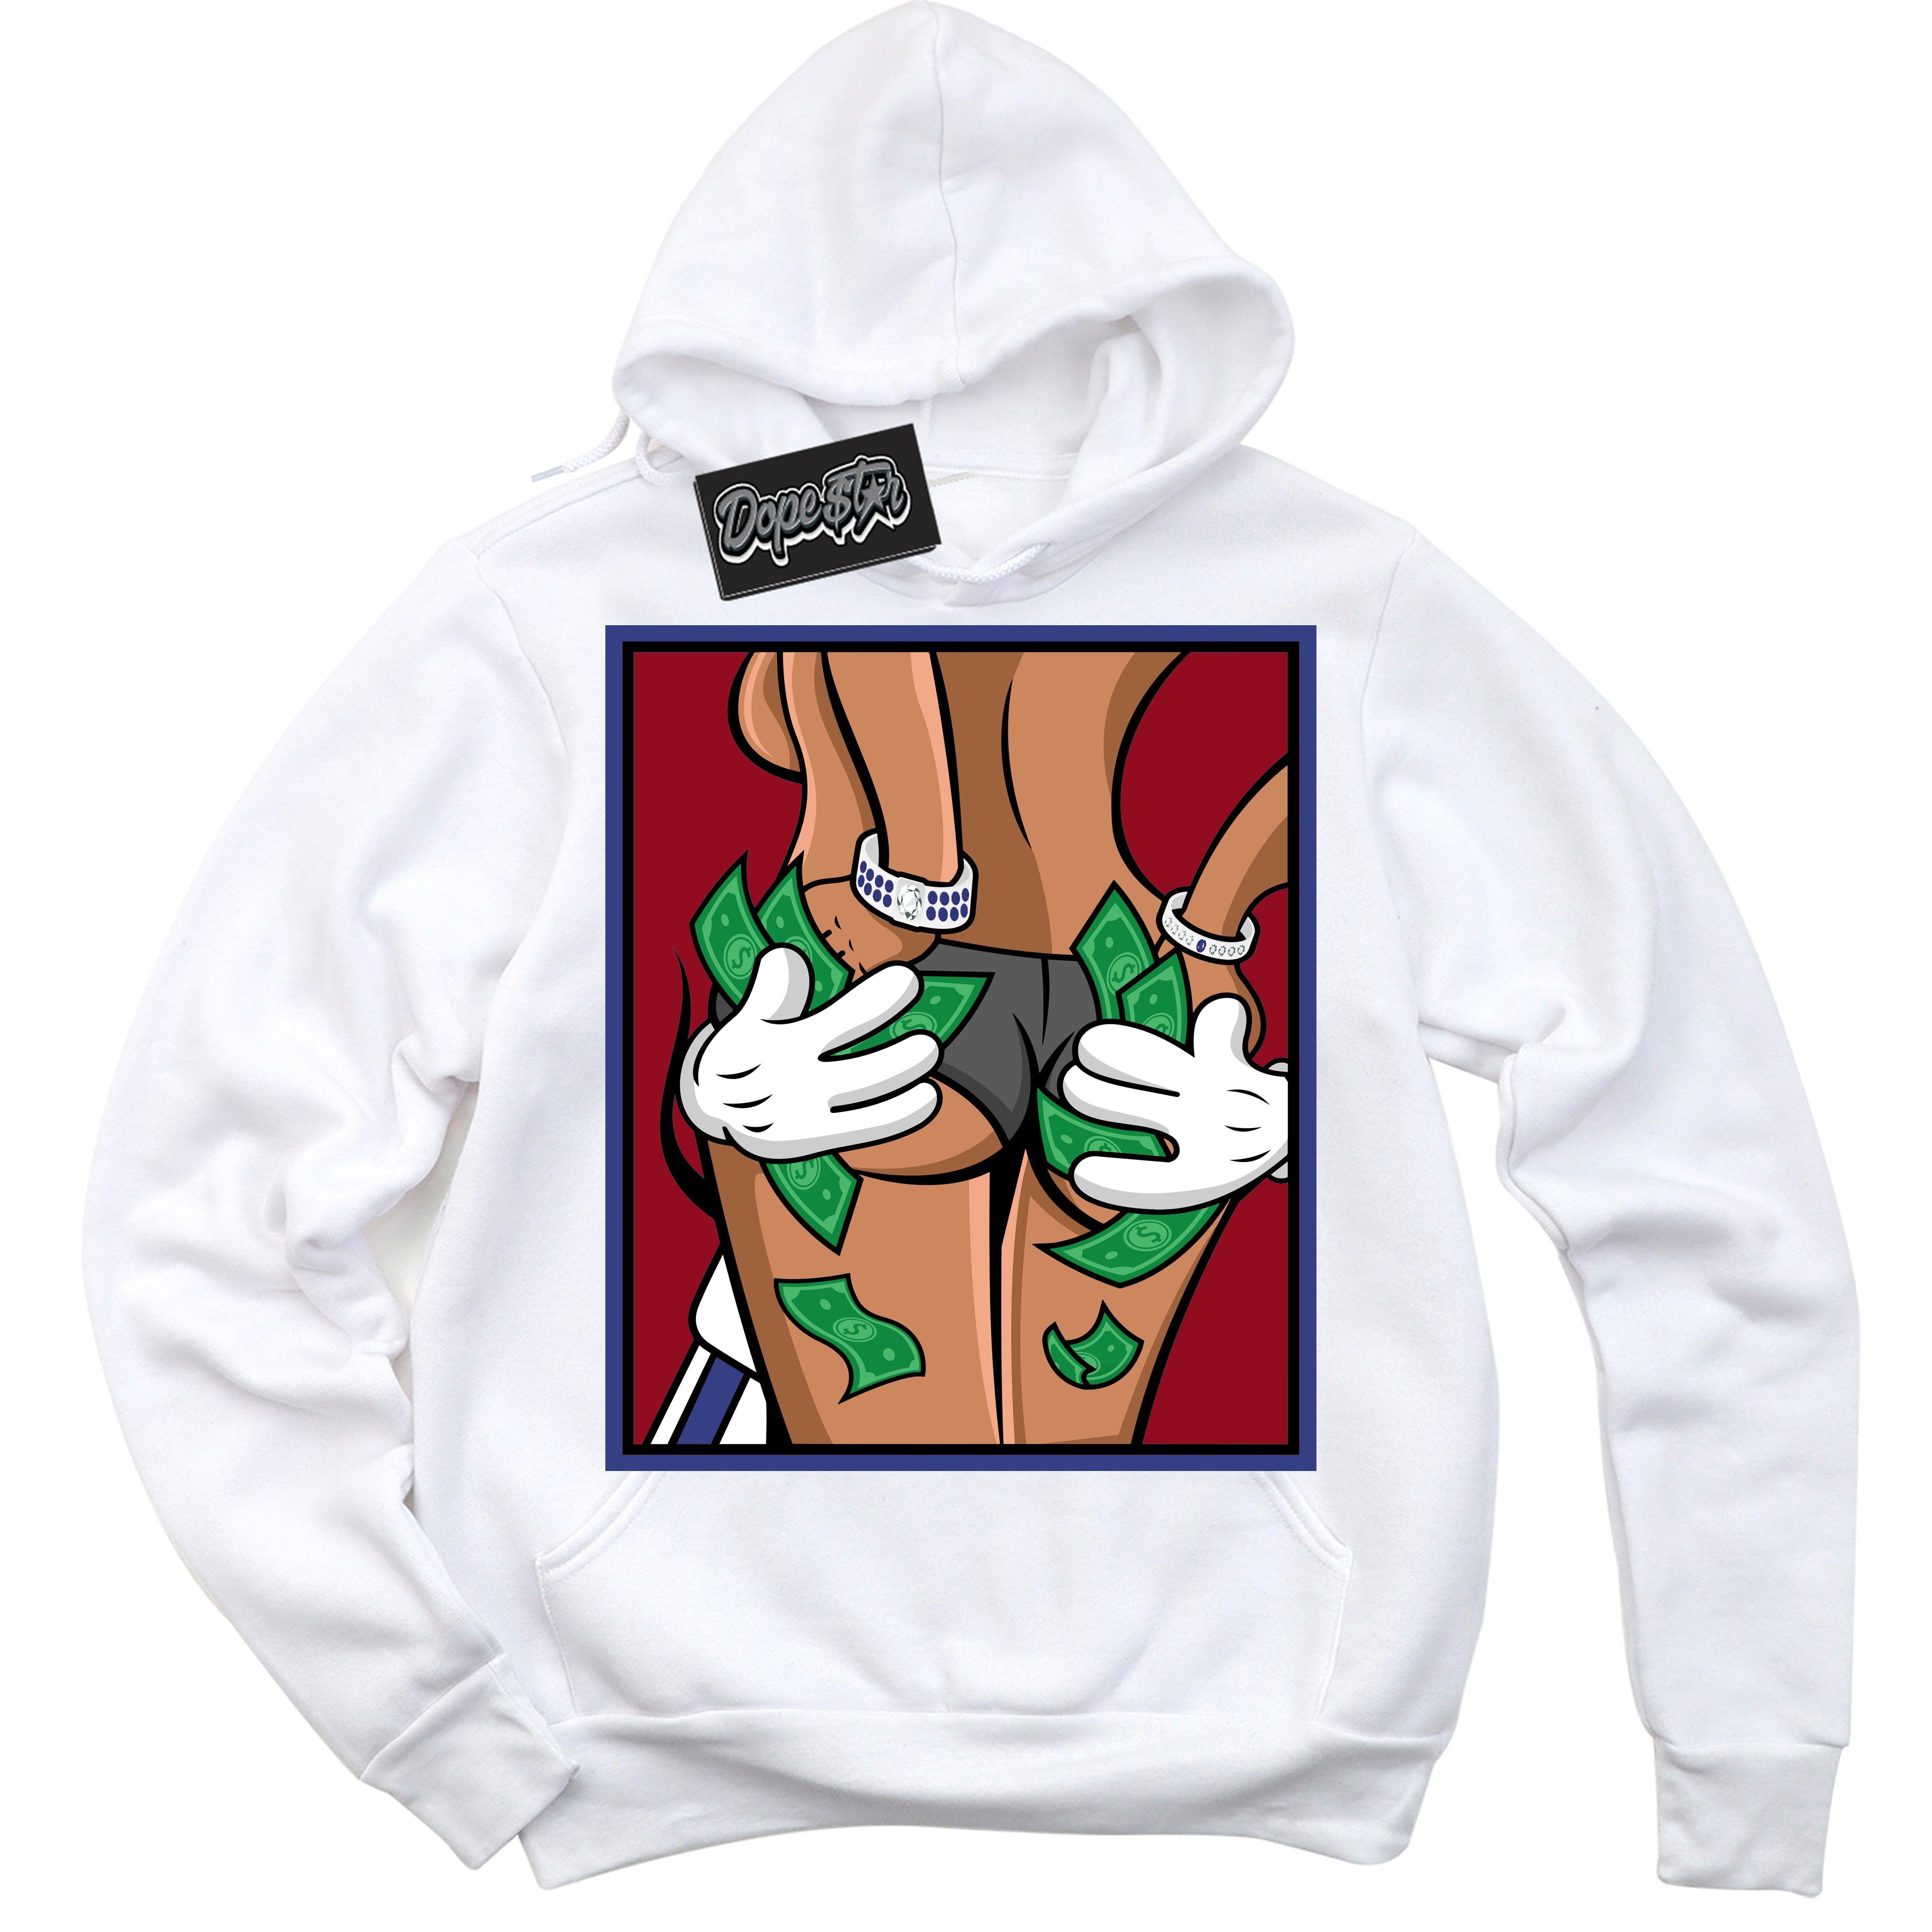 Cool White Hoodie with “ Money Hands ”  design that Perfectly Matches Playoffs 8s Sneakers.